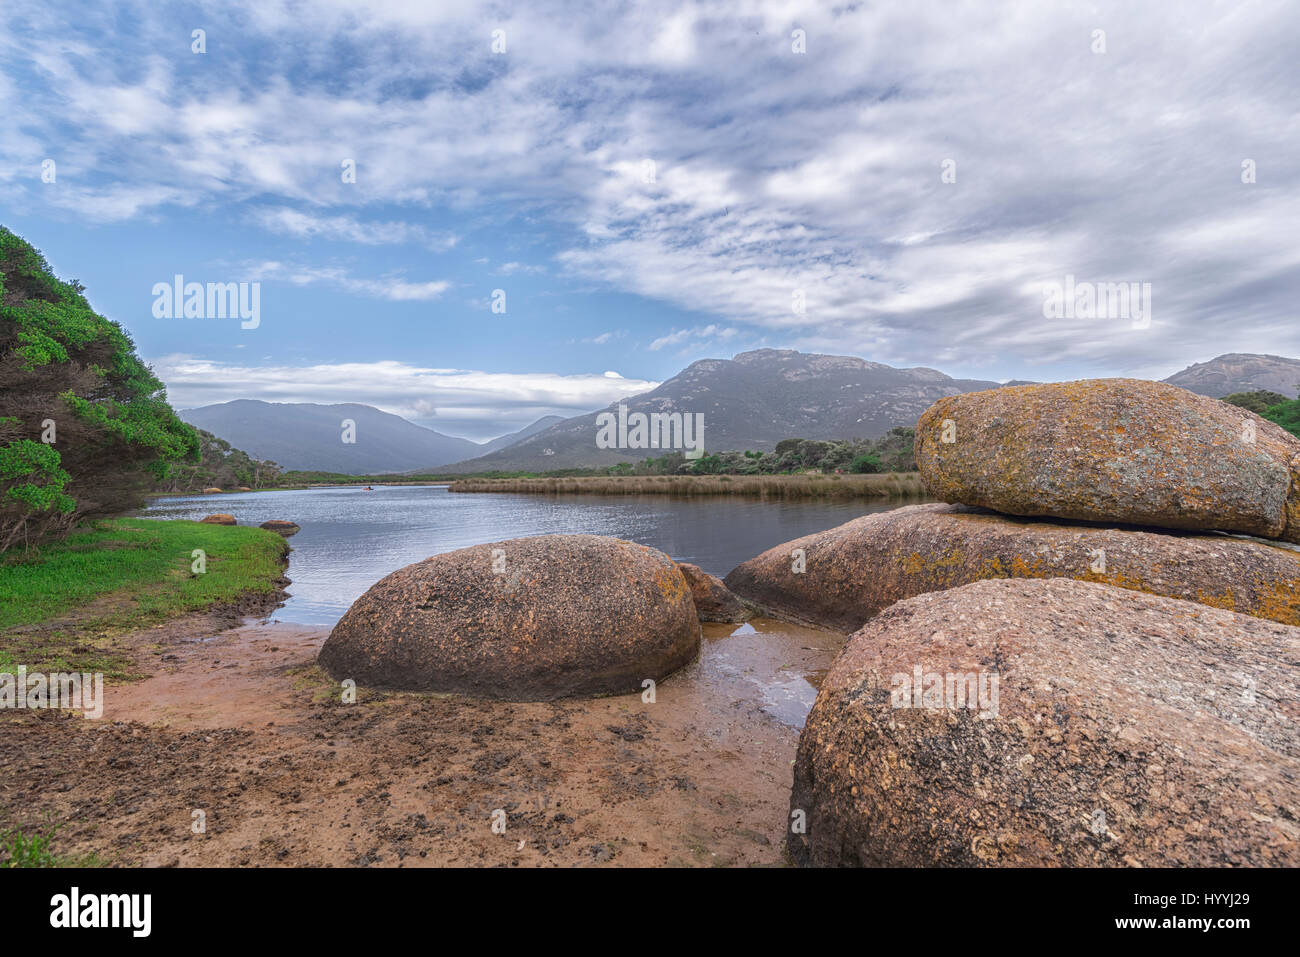 A beautiful landscape view of a distant mountain range with a tree line and large rocks in the foreground and a clam river flowing down the middle. Stock Photo